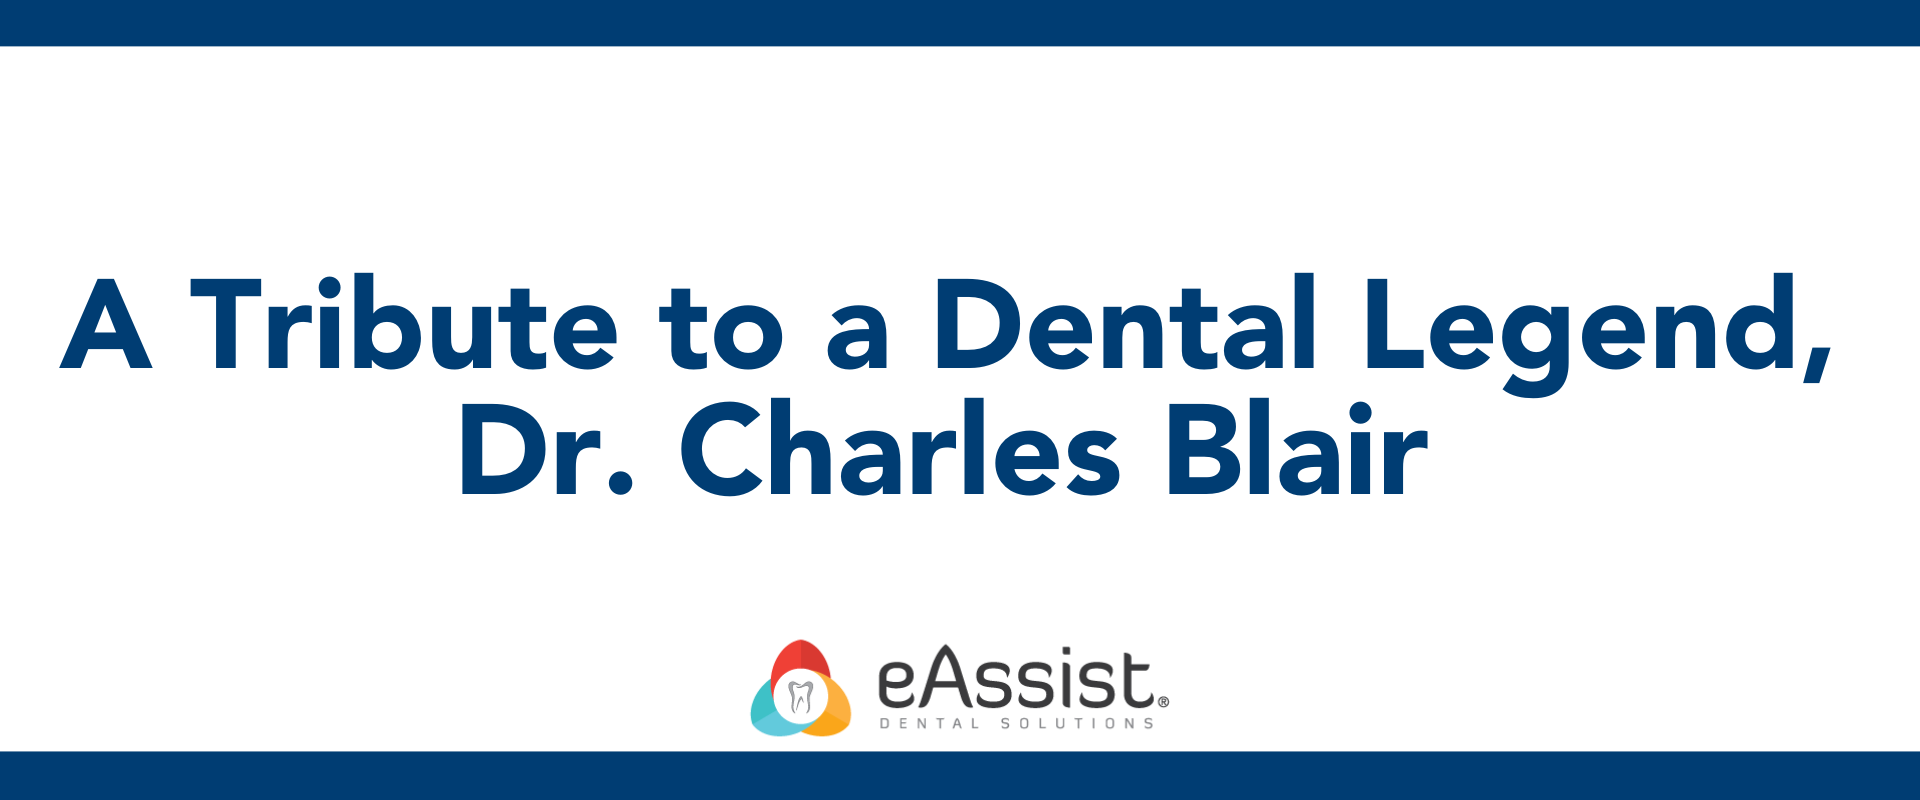 A Tribute to a Dental Legend, Dr. Charles Blair